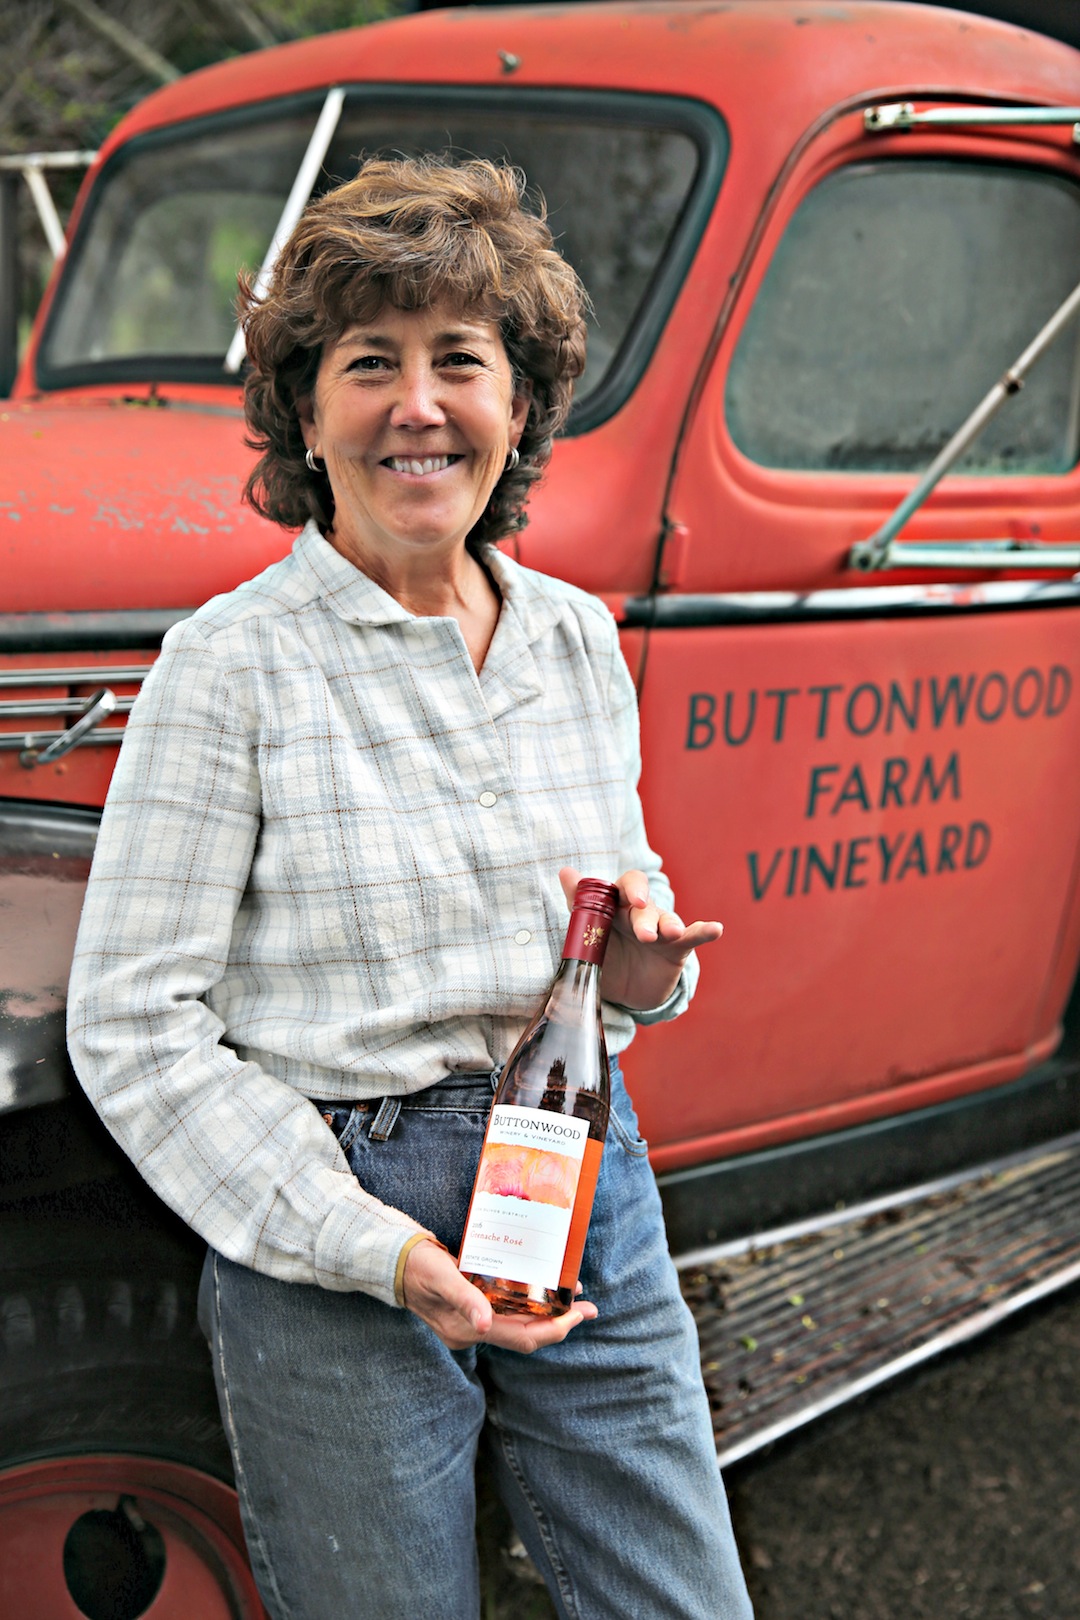 Tenley Fohl Photography/ Karen Steinwachs, general manager and winemaker at Buttonwood Farm Winery & Vineyards and winemaker/owner of Seagrape Wine Co., is organizing the March 8 event at K'Syrah Catering in Solvang.